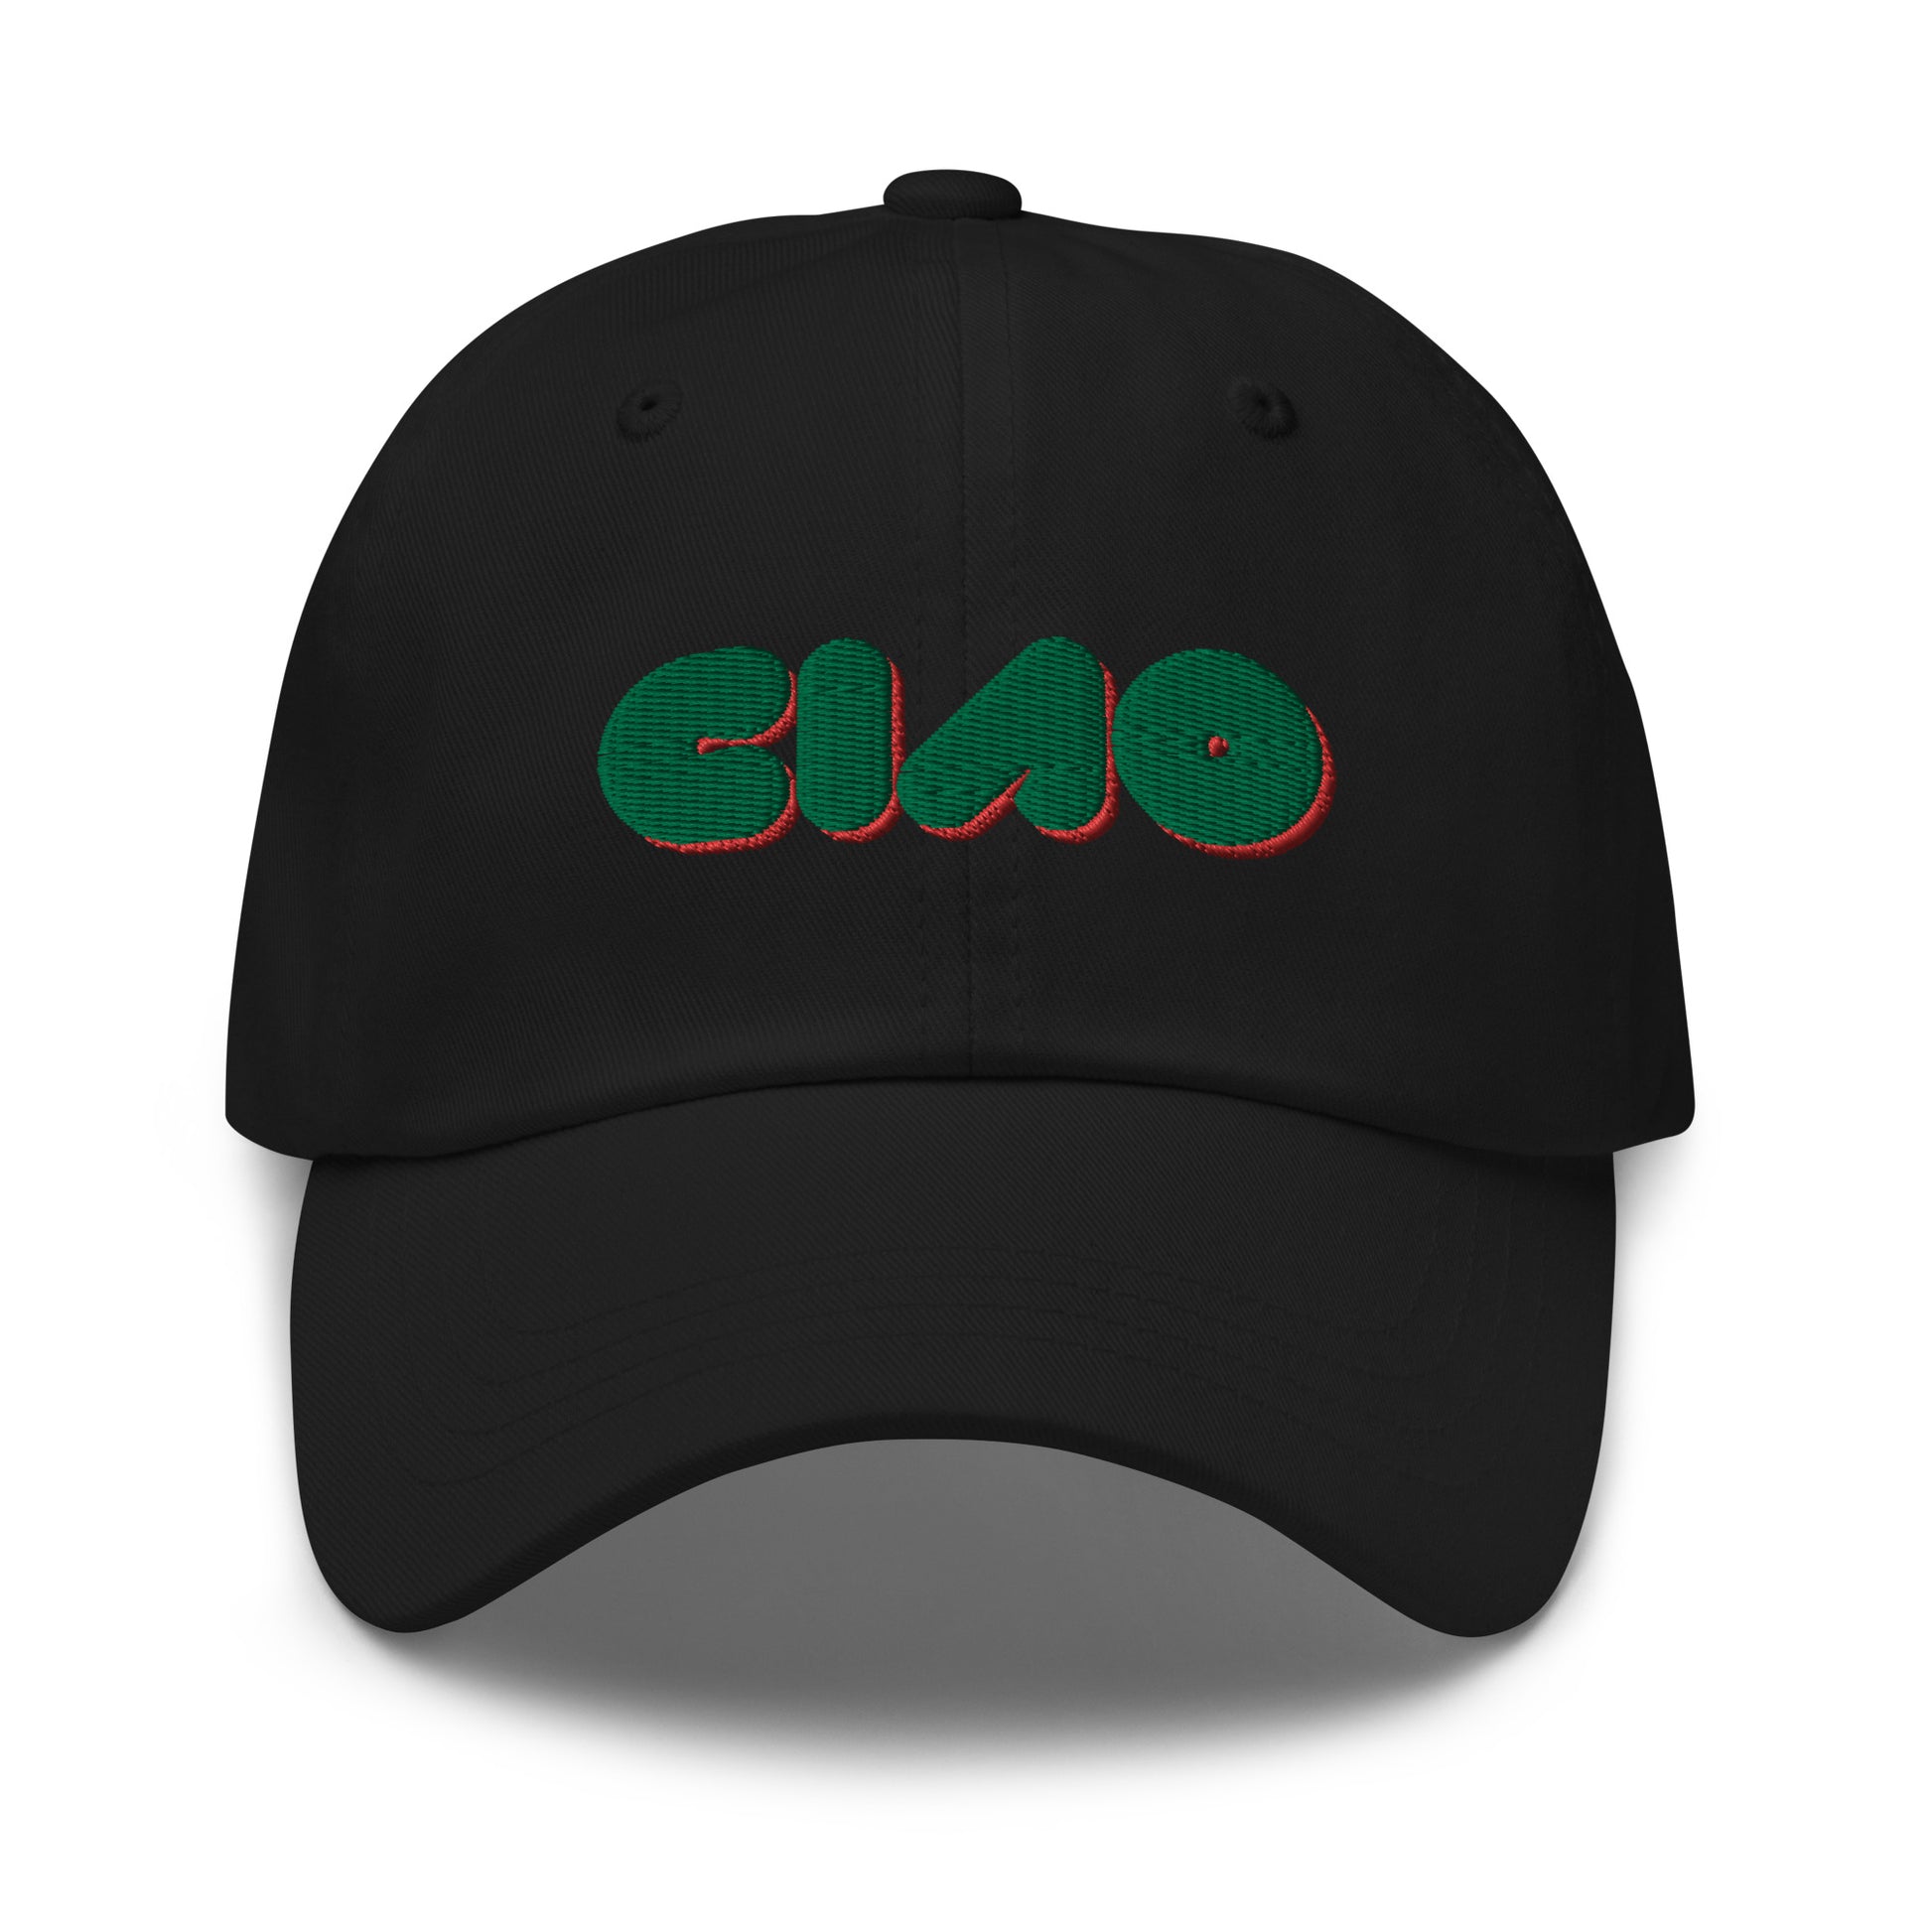 CIAO Bubble - Dad hat - PIZZ